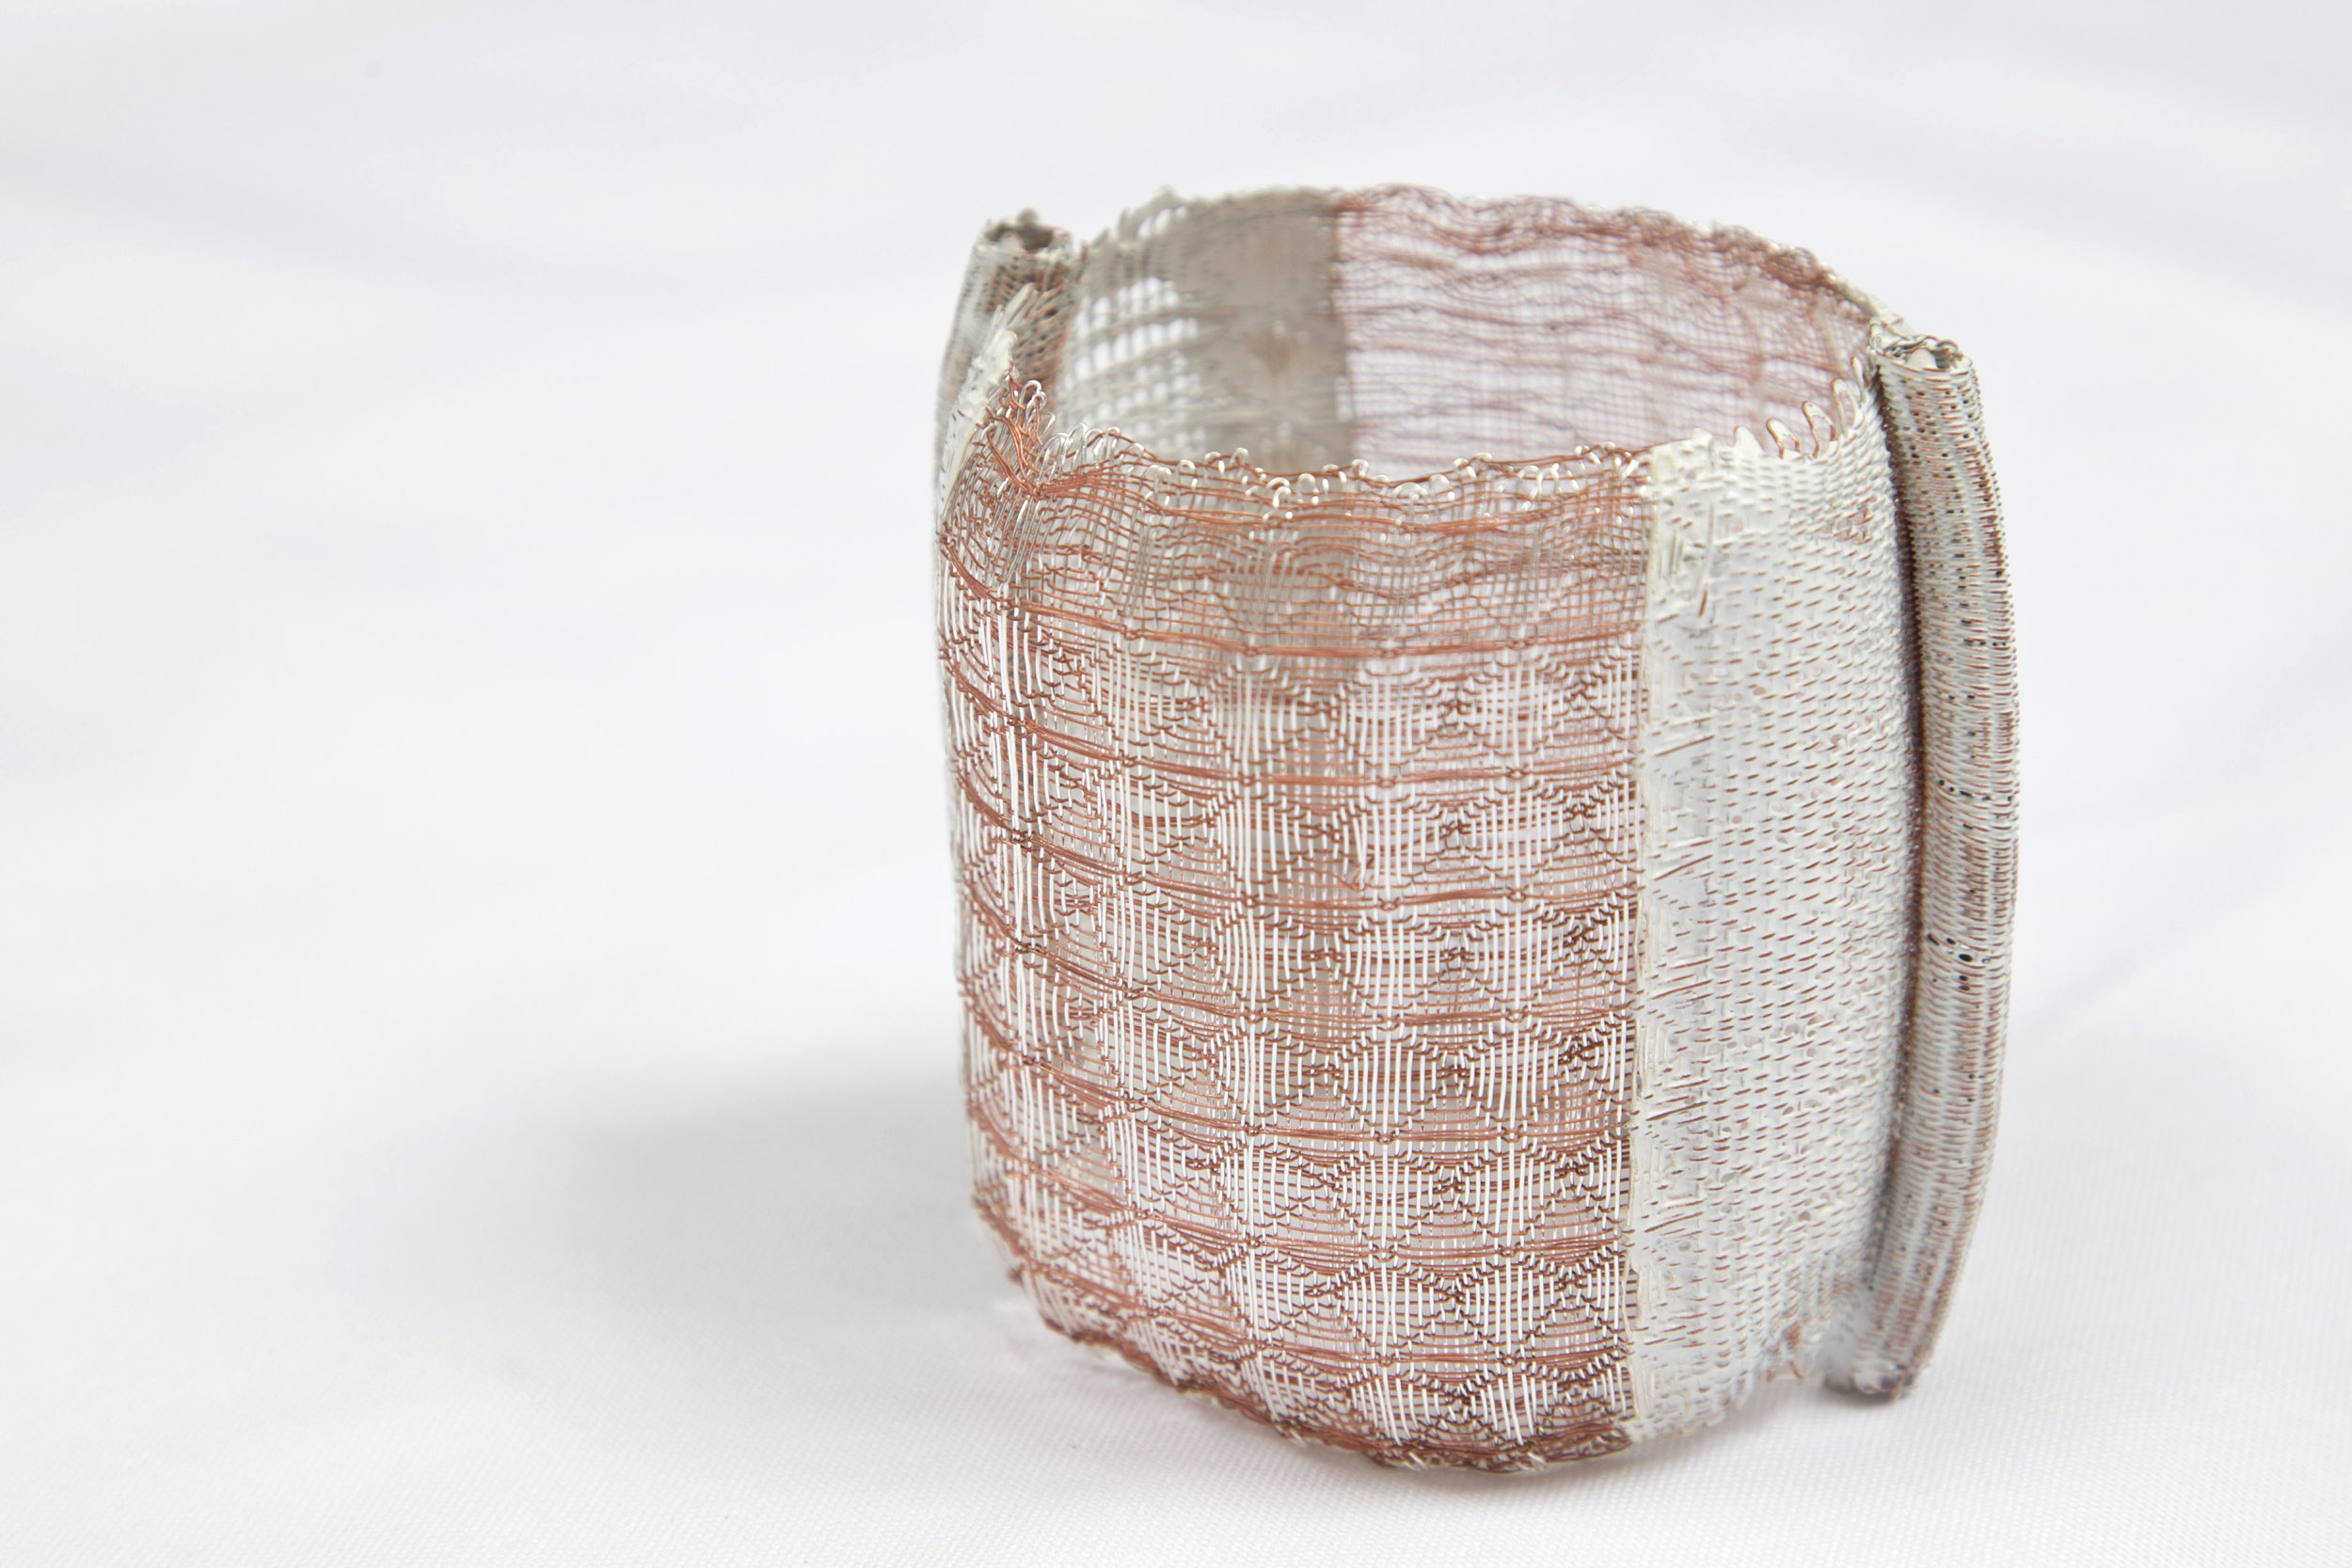  Handwoven fine silver and copper. Double waffle weave construction. Enameled. 